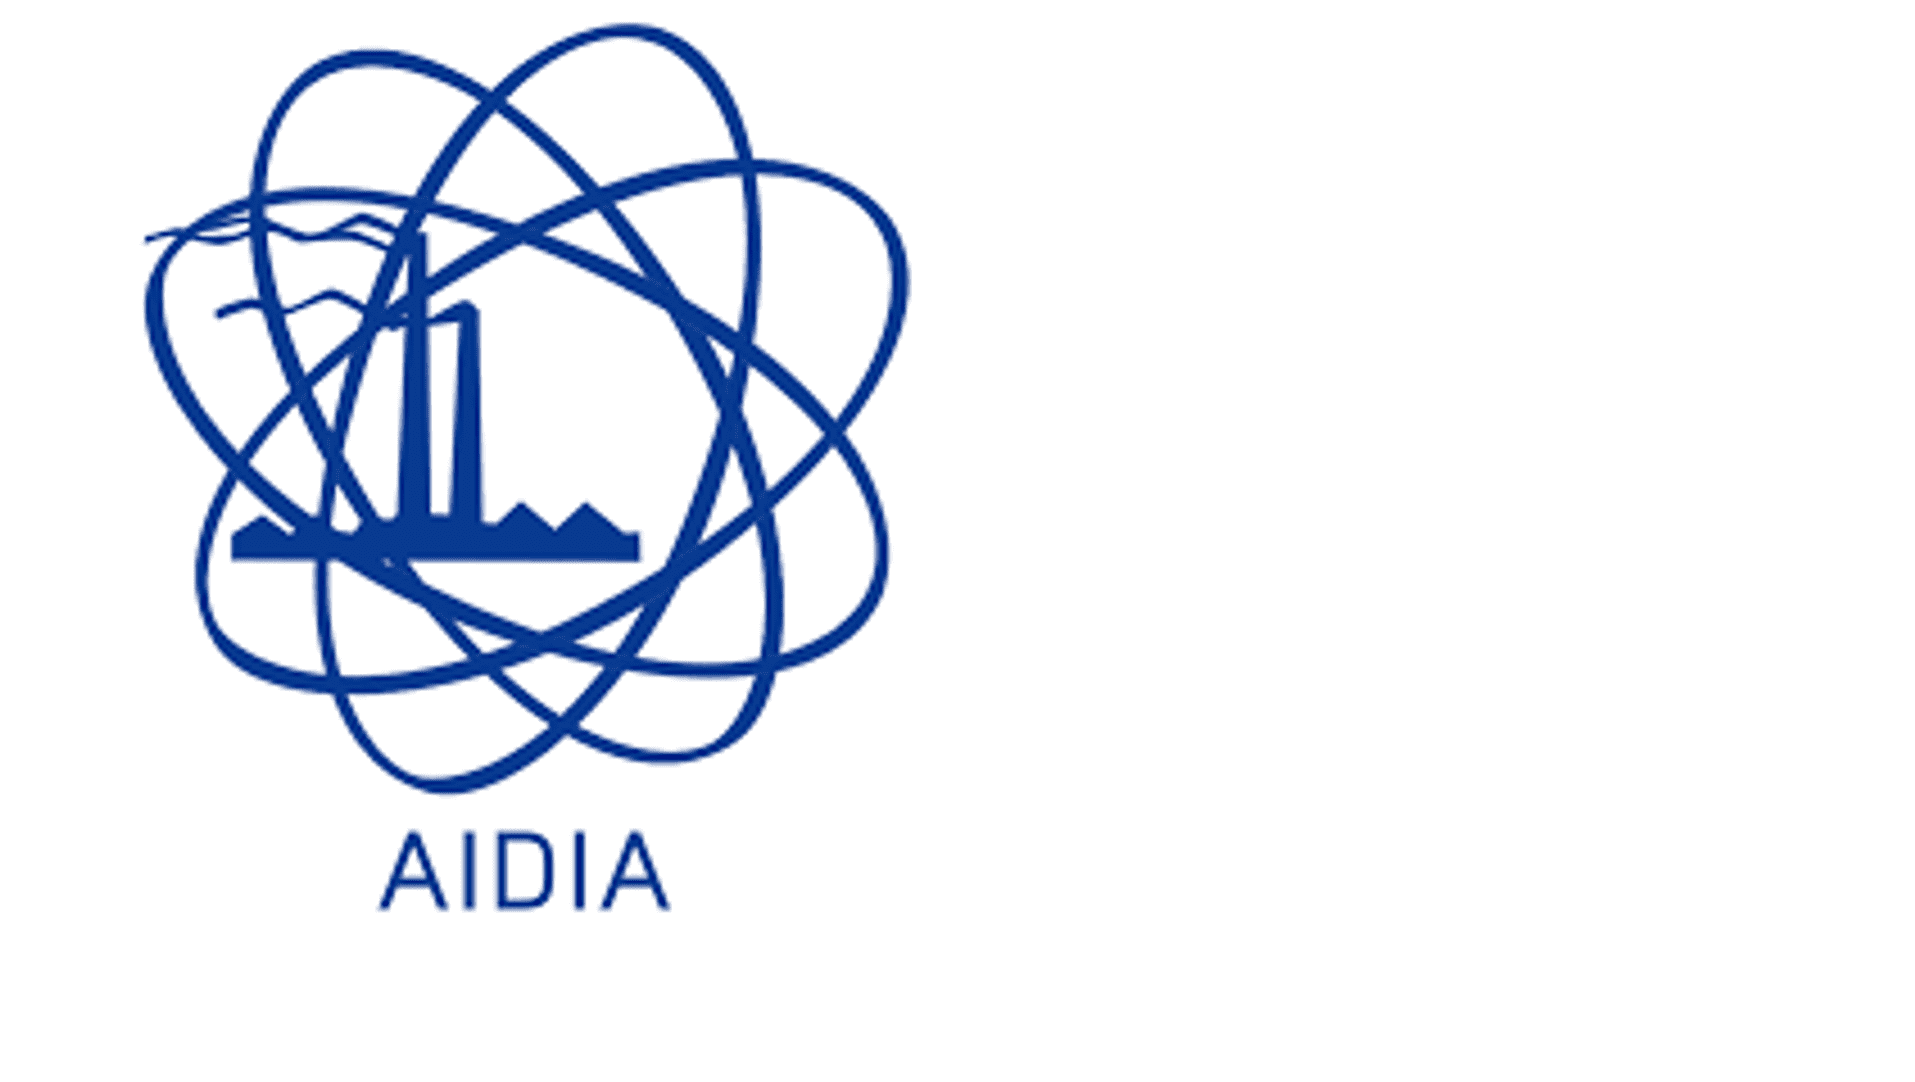 AIDIA Association of Women Engineers and Architects